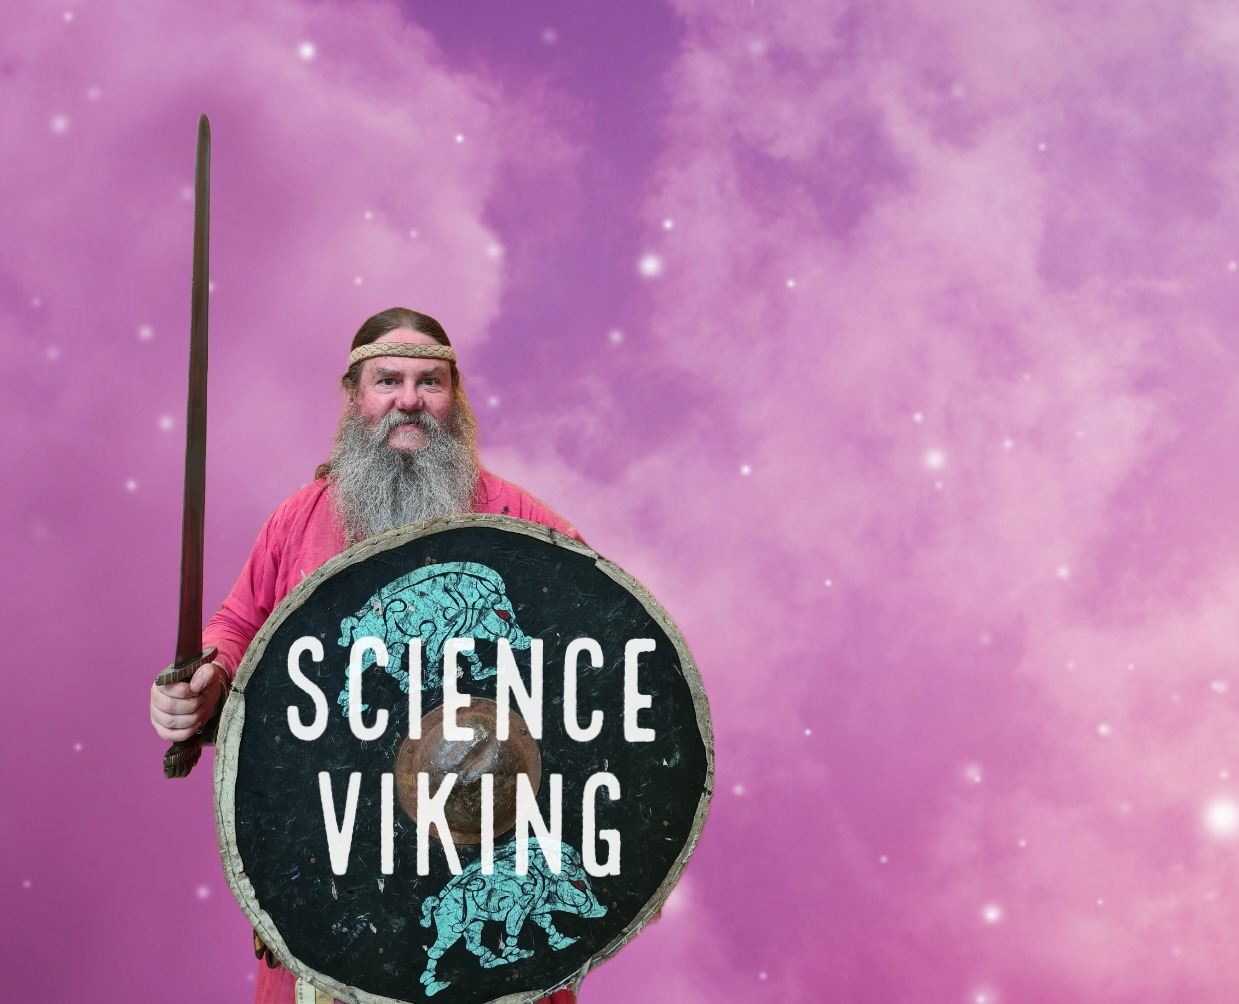 The Science Viking